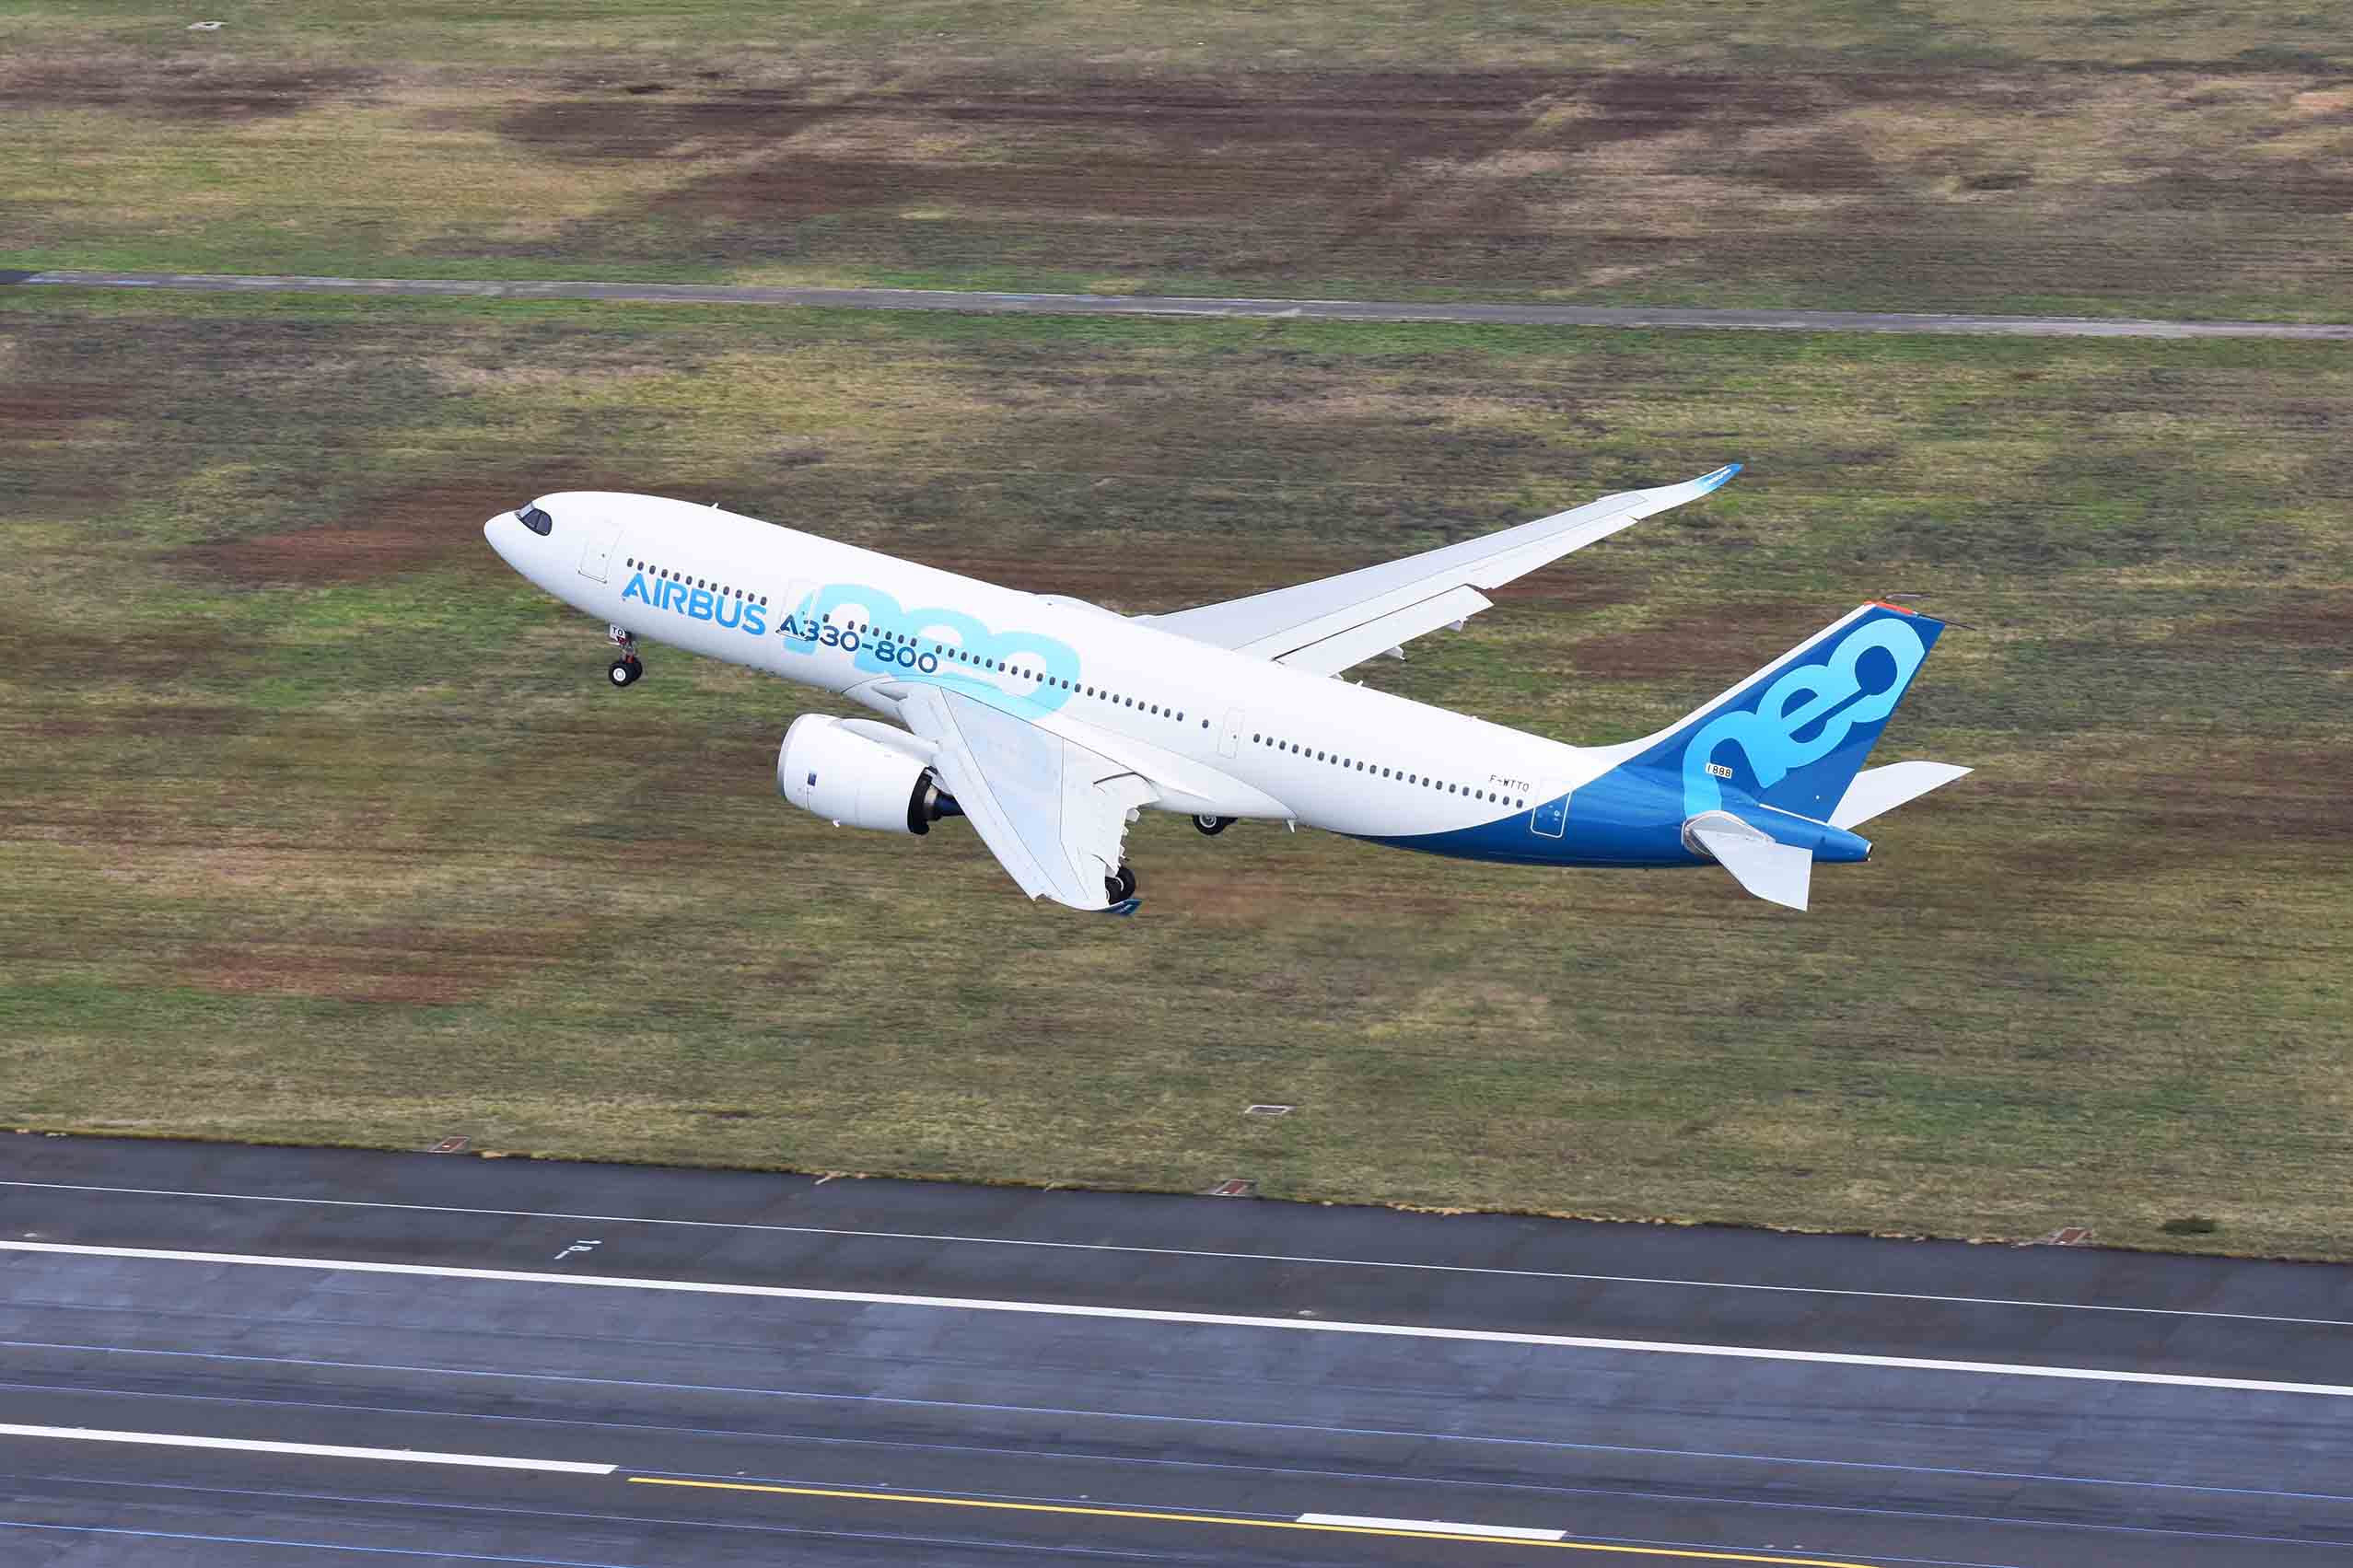 First A330-800 becomes airborne for its maiden flight